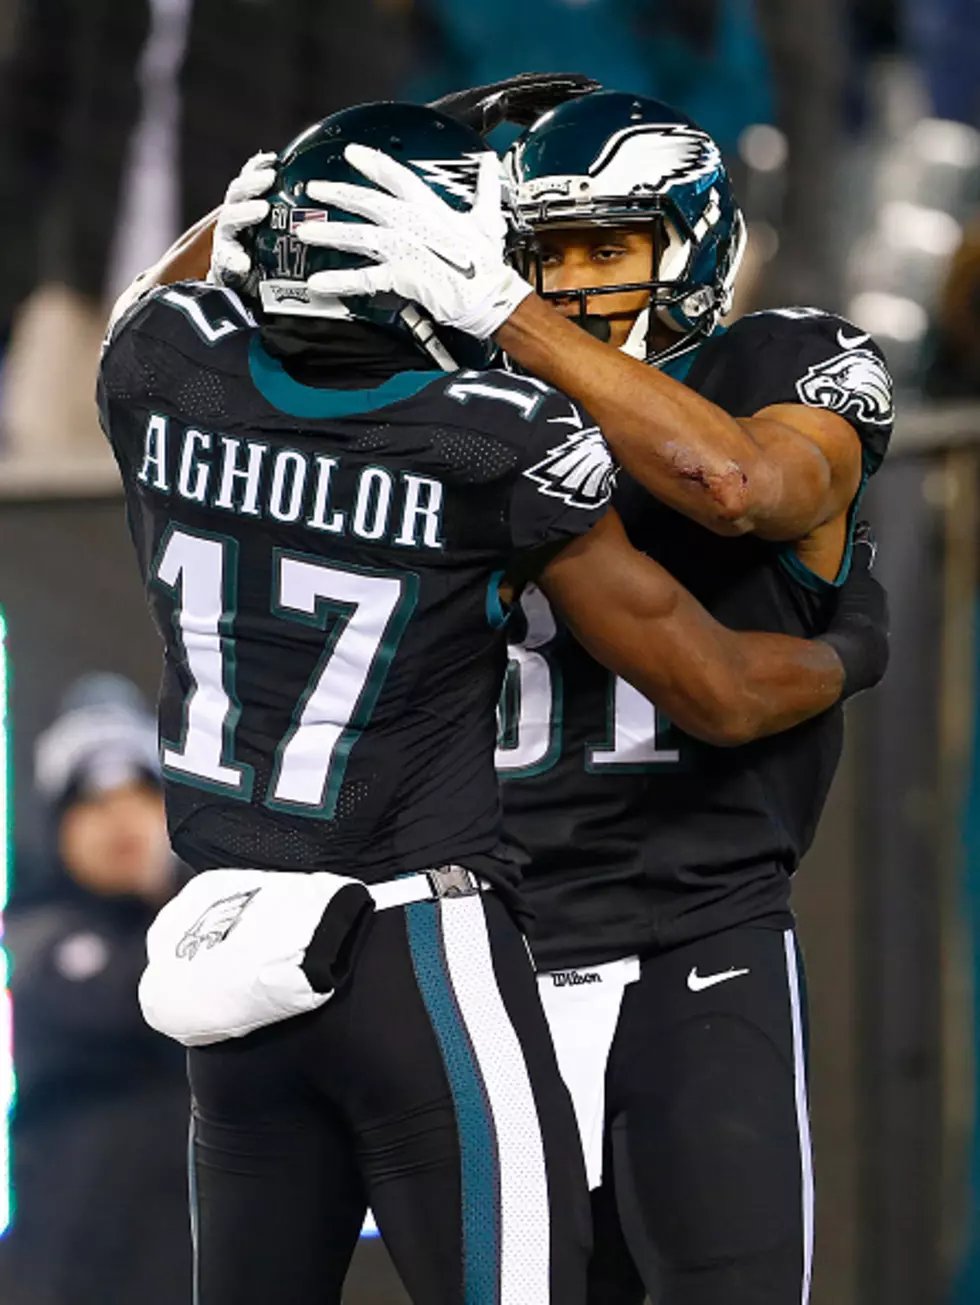 How Good Can Eagles WR be?